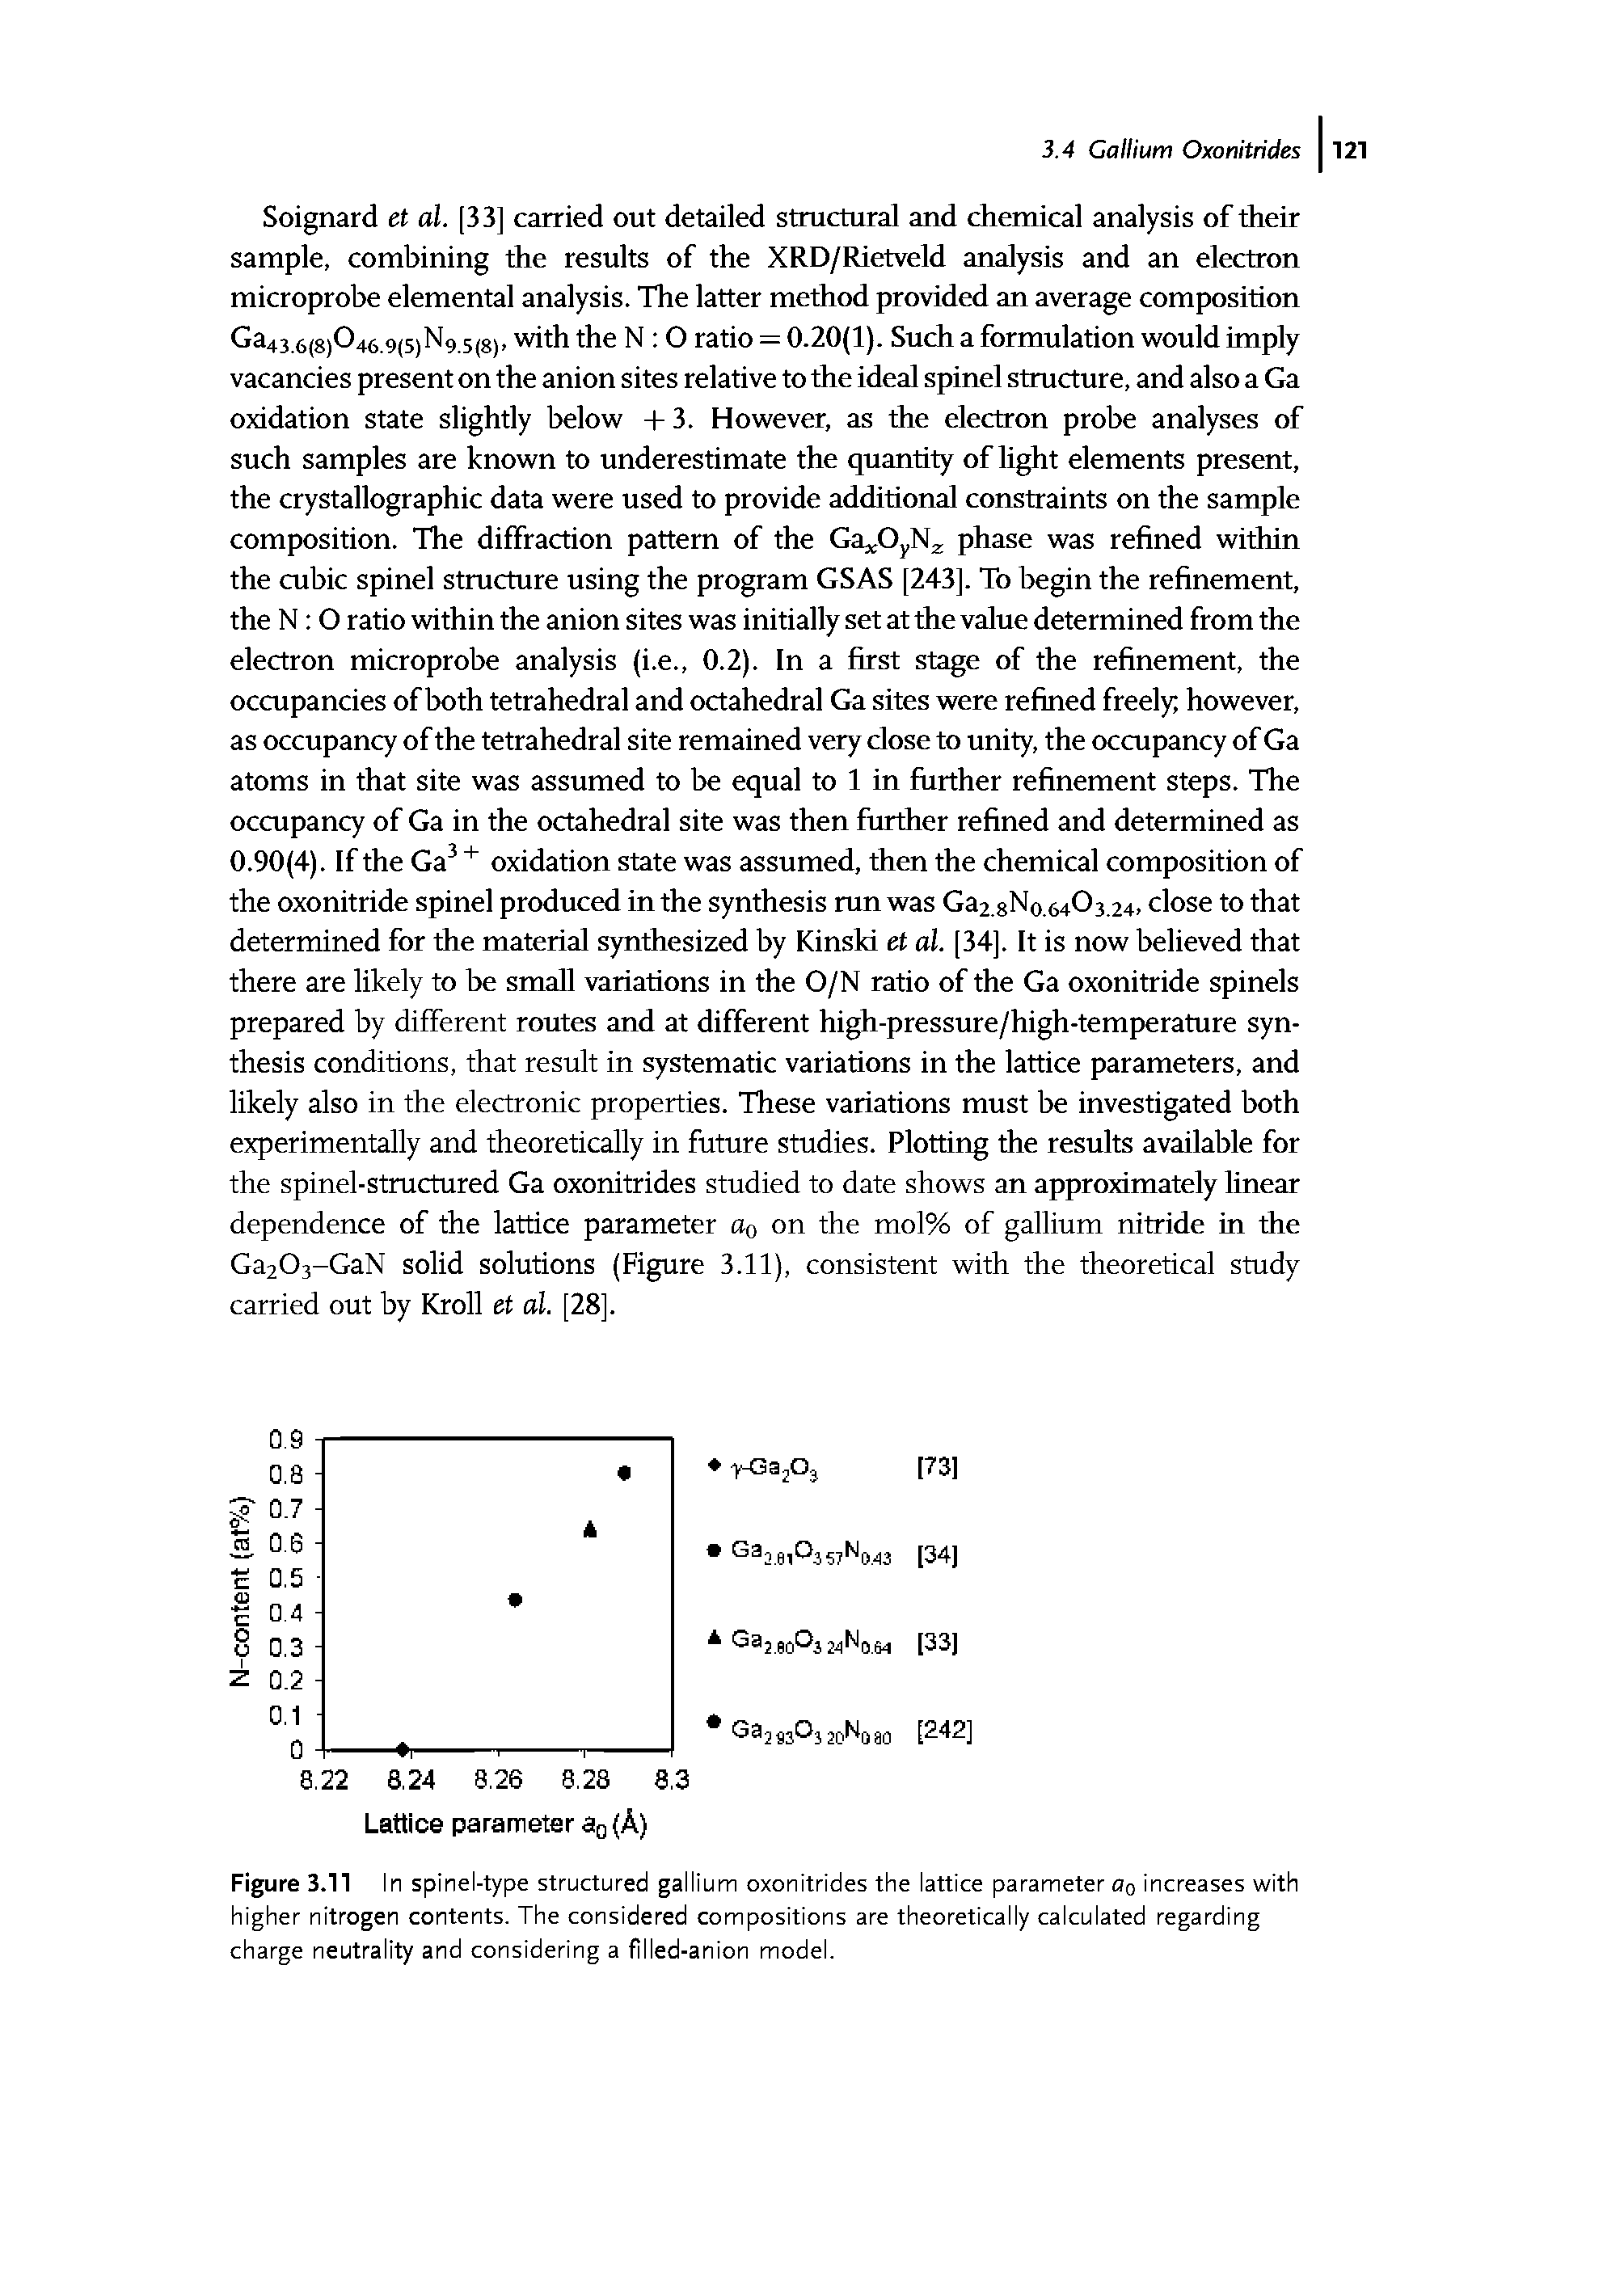 Figure 3.11 In spinel-type structured gallium oxonitrides the lattice parameter Oq increases with higher nitrogen contents. The considered compositions are theoretically calculated regarding charge neutrality and considering a fllled-anion model.